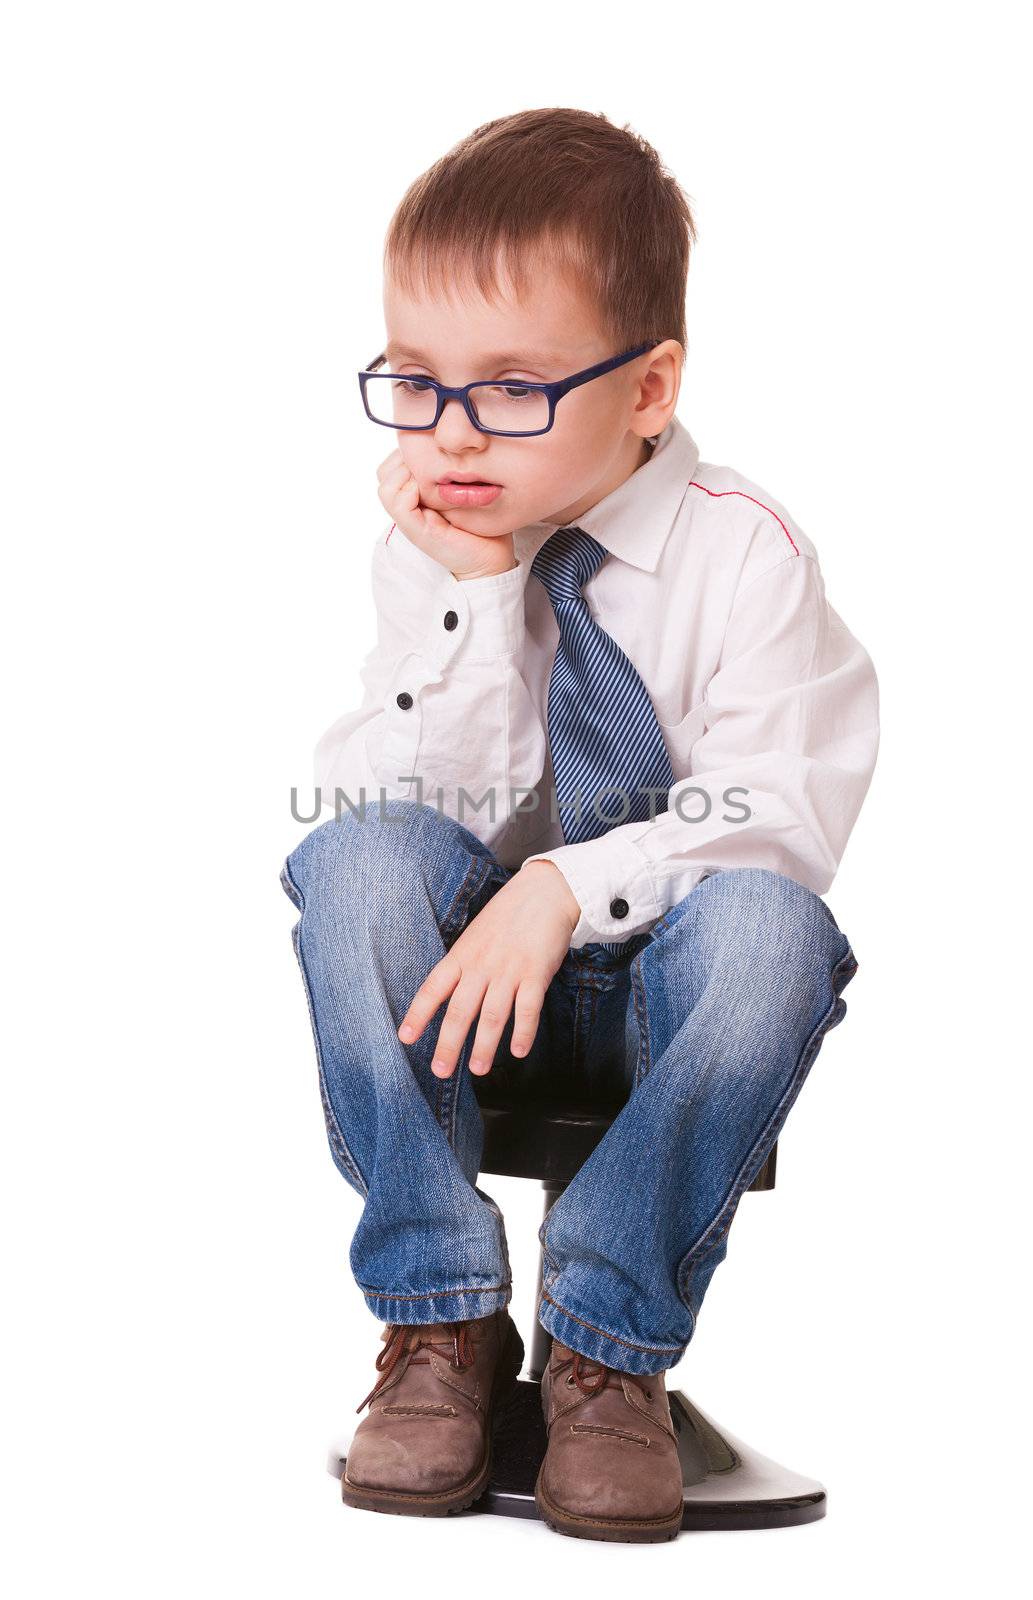 Very sad clever kid in jeans and shirt sitting on small chair isolated on white background